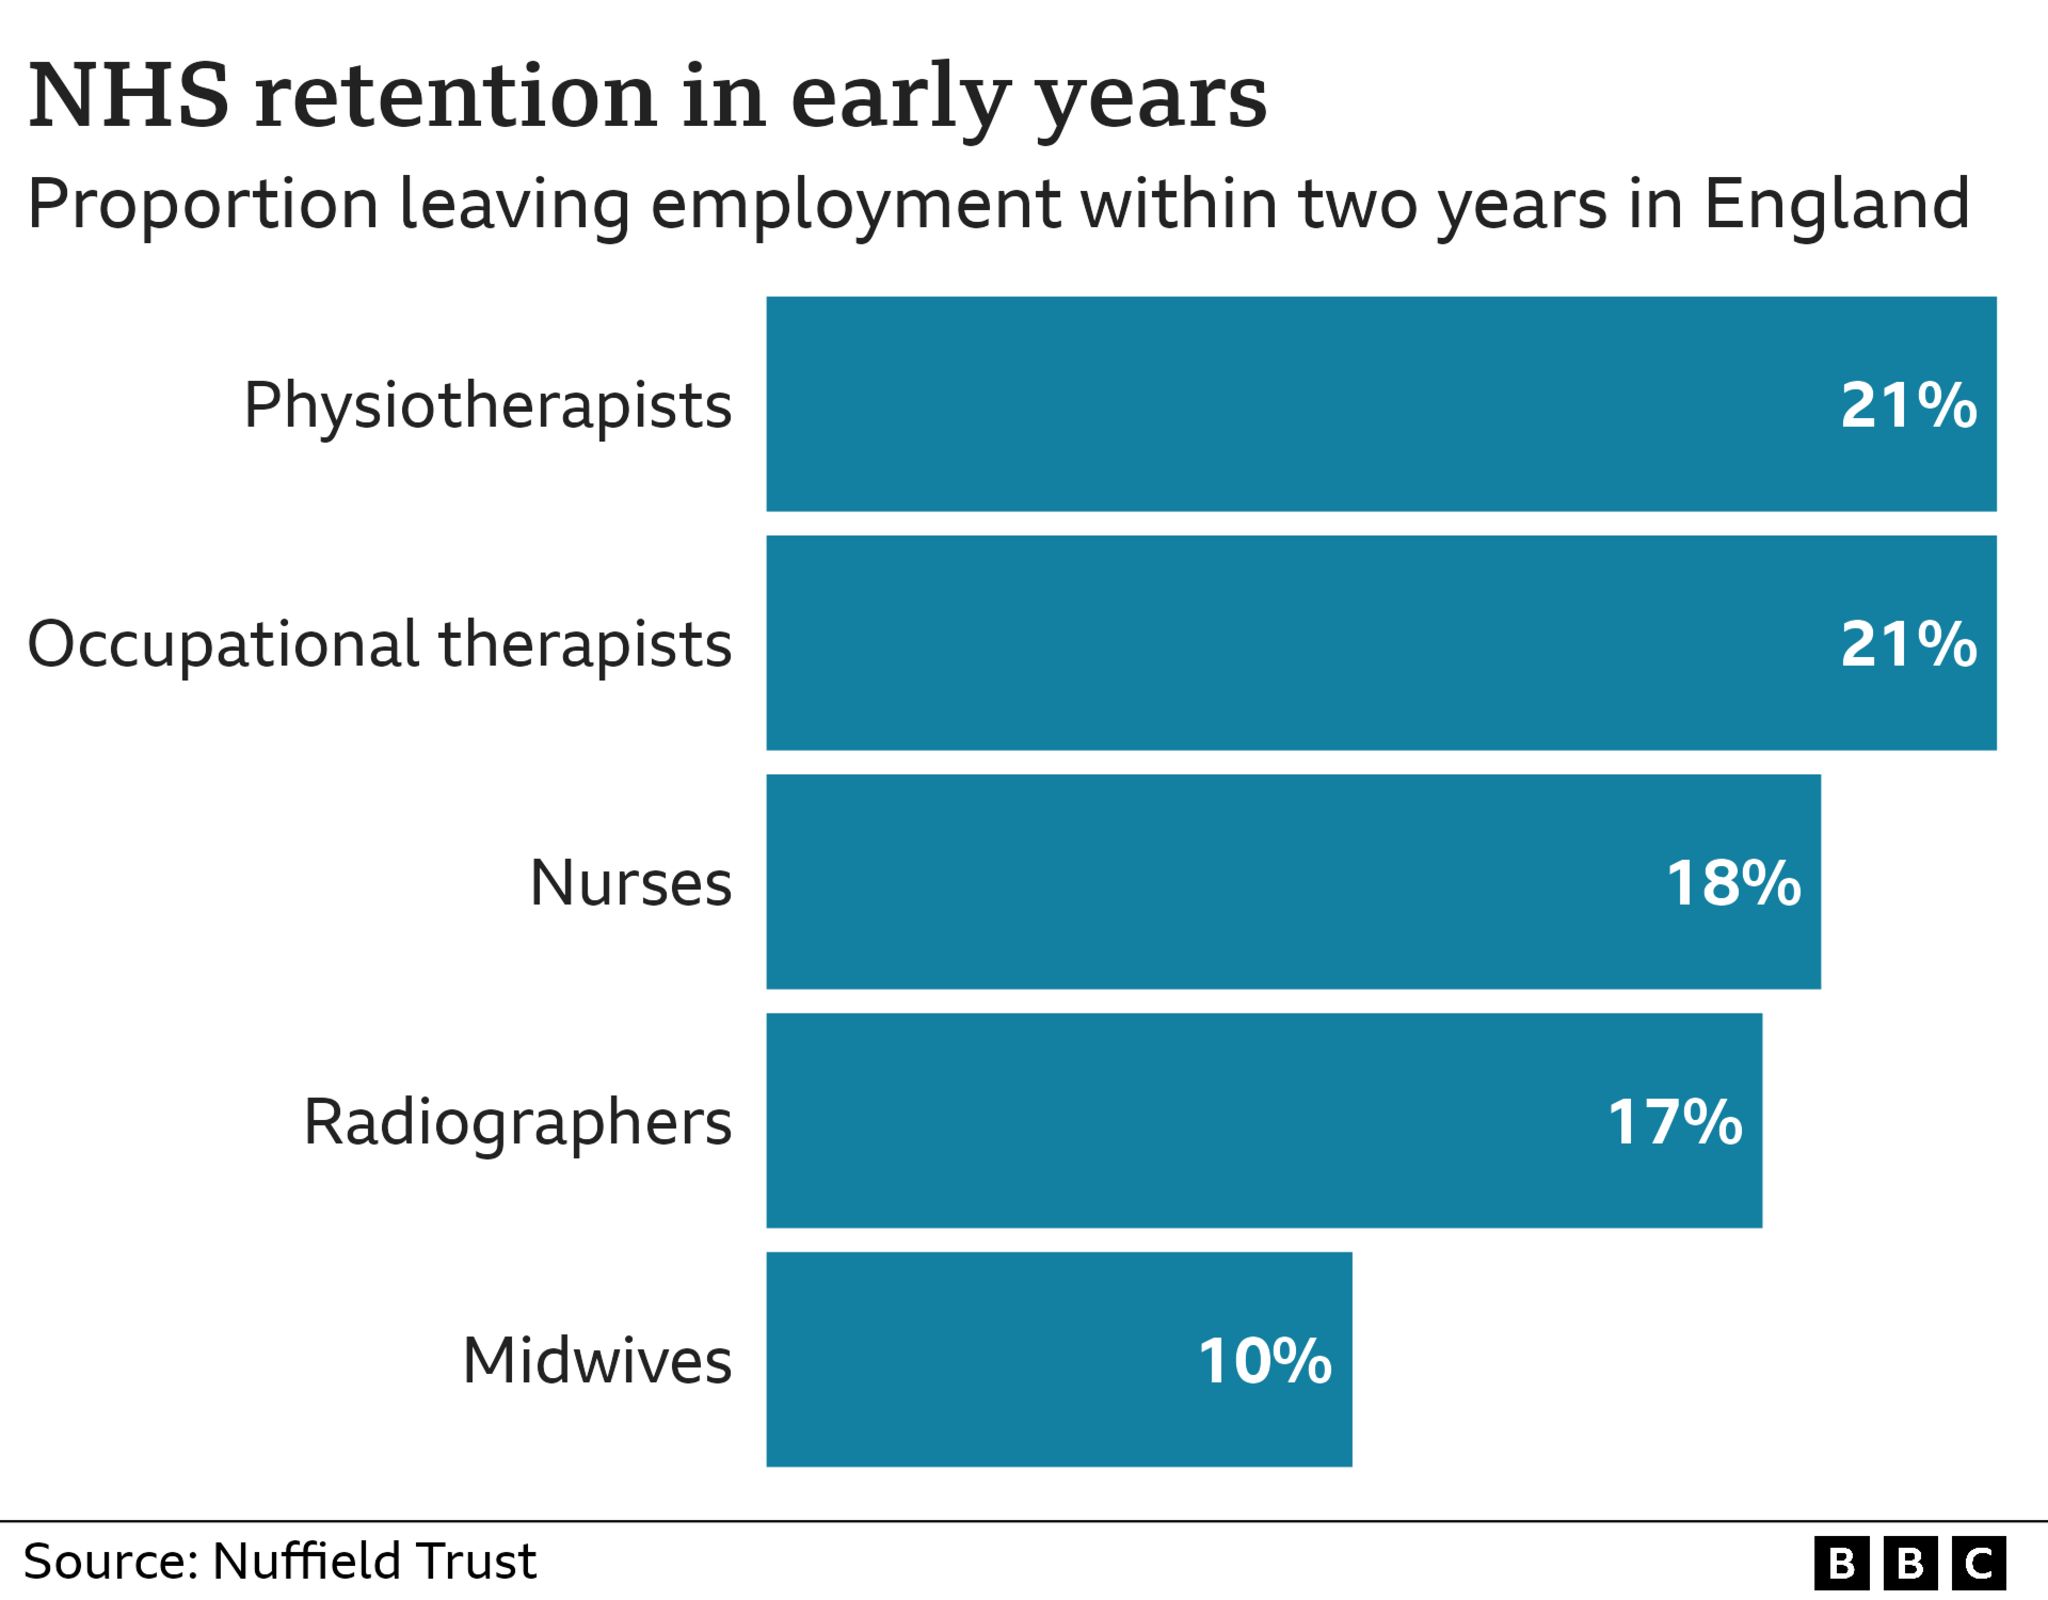 Chart showing proportion leaving NHS within two years